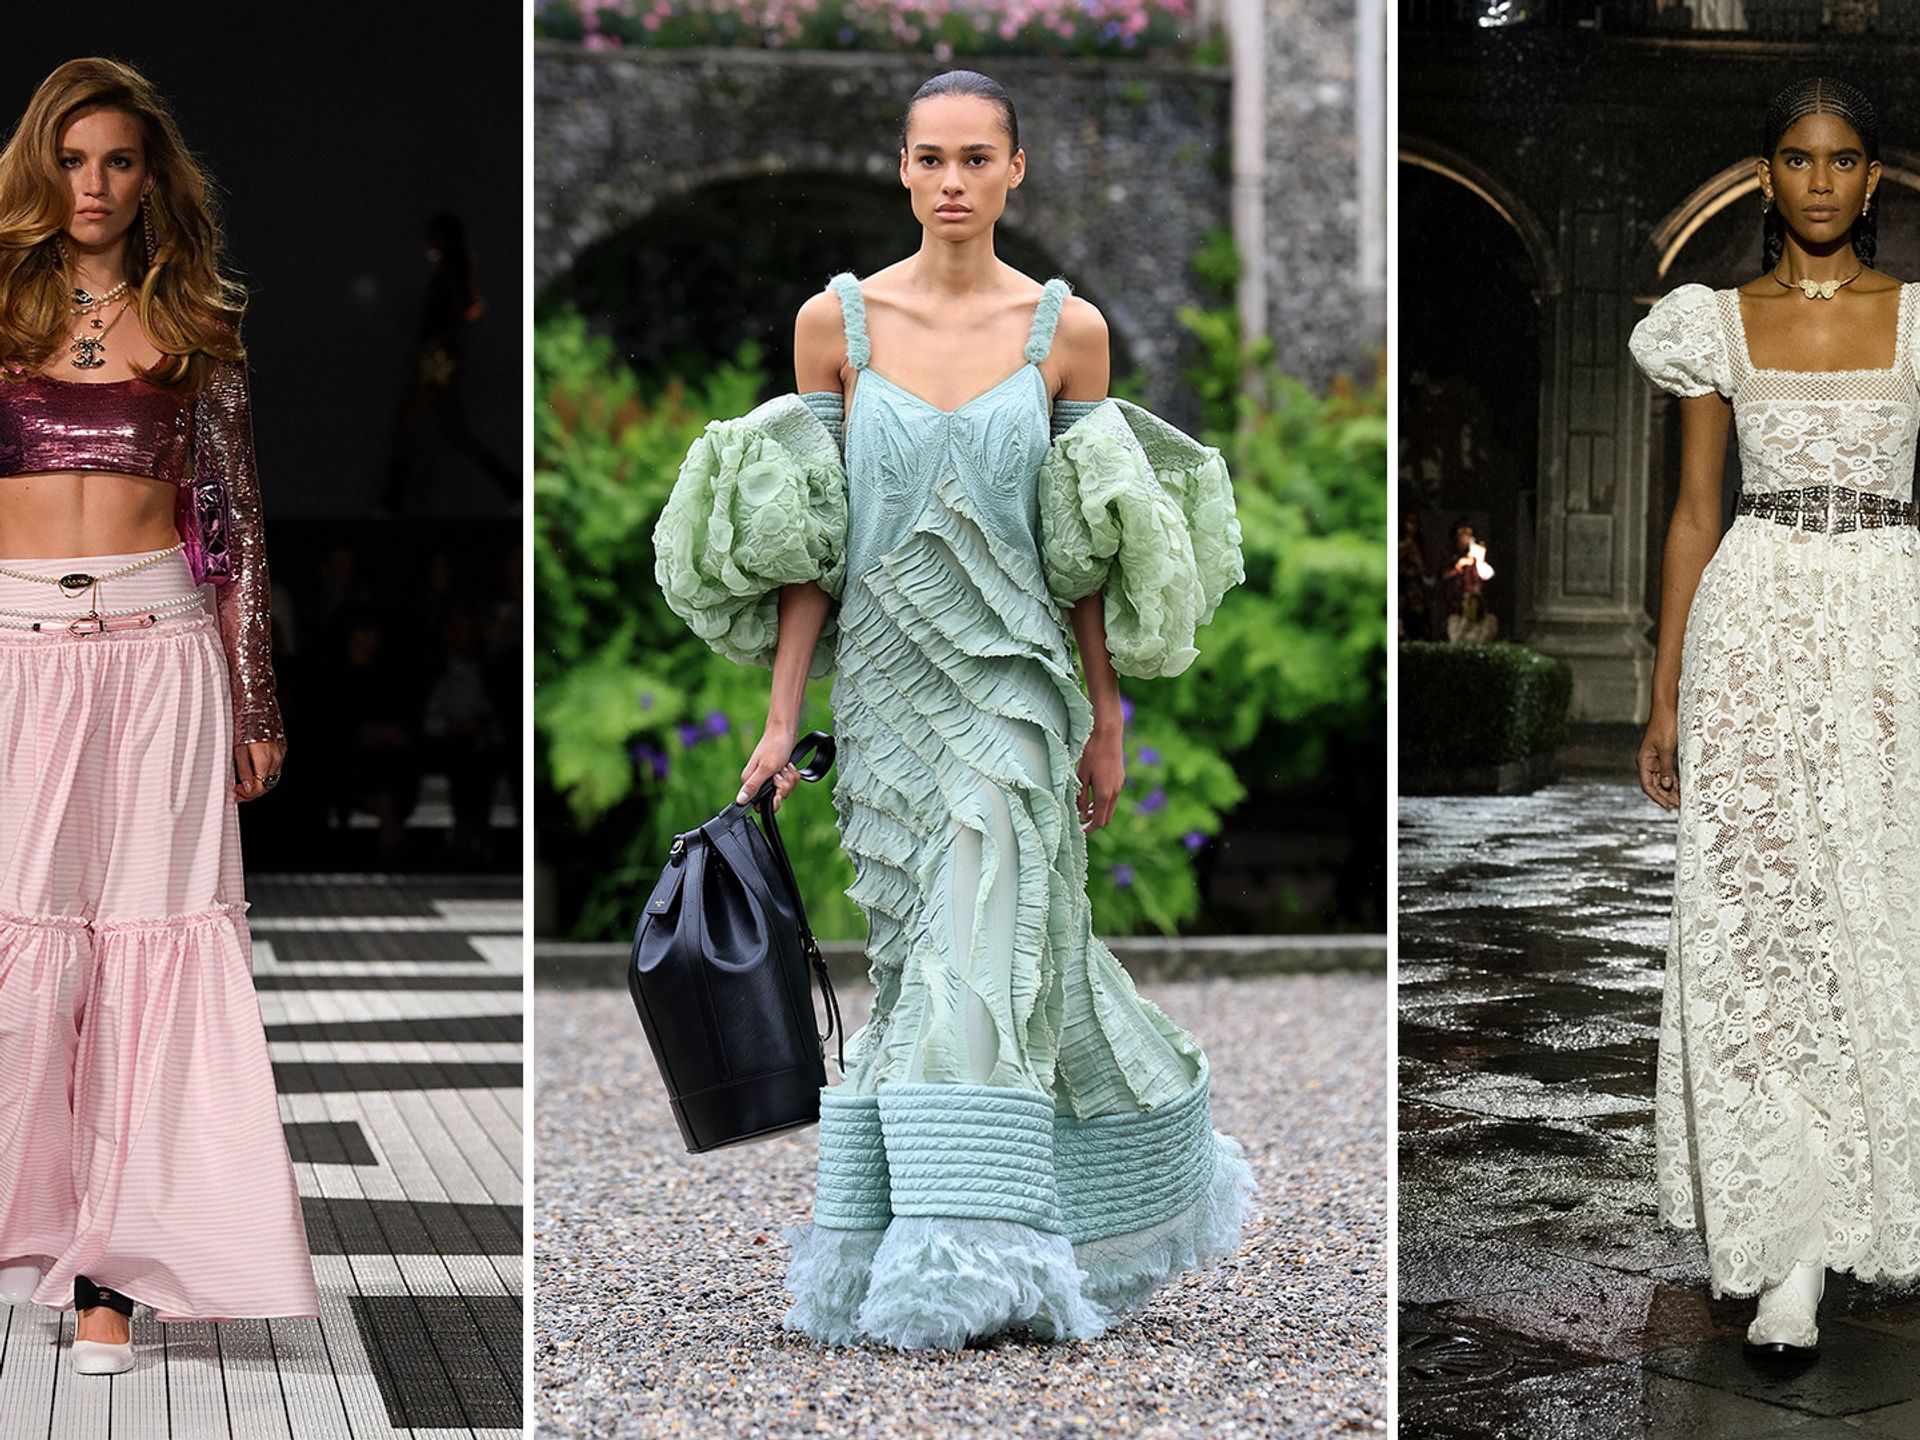 Louis Vuitton's Cruise 2024 Show in Isola Bella Celebrated the Life Aquatic